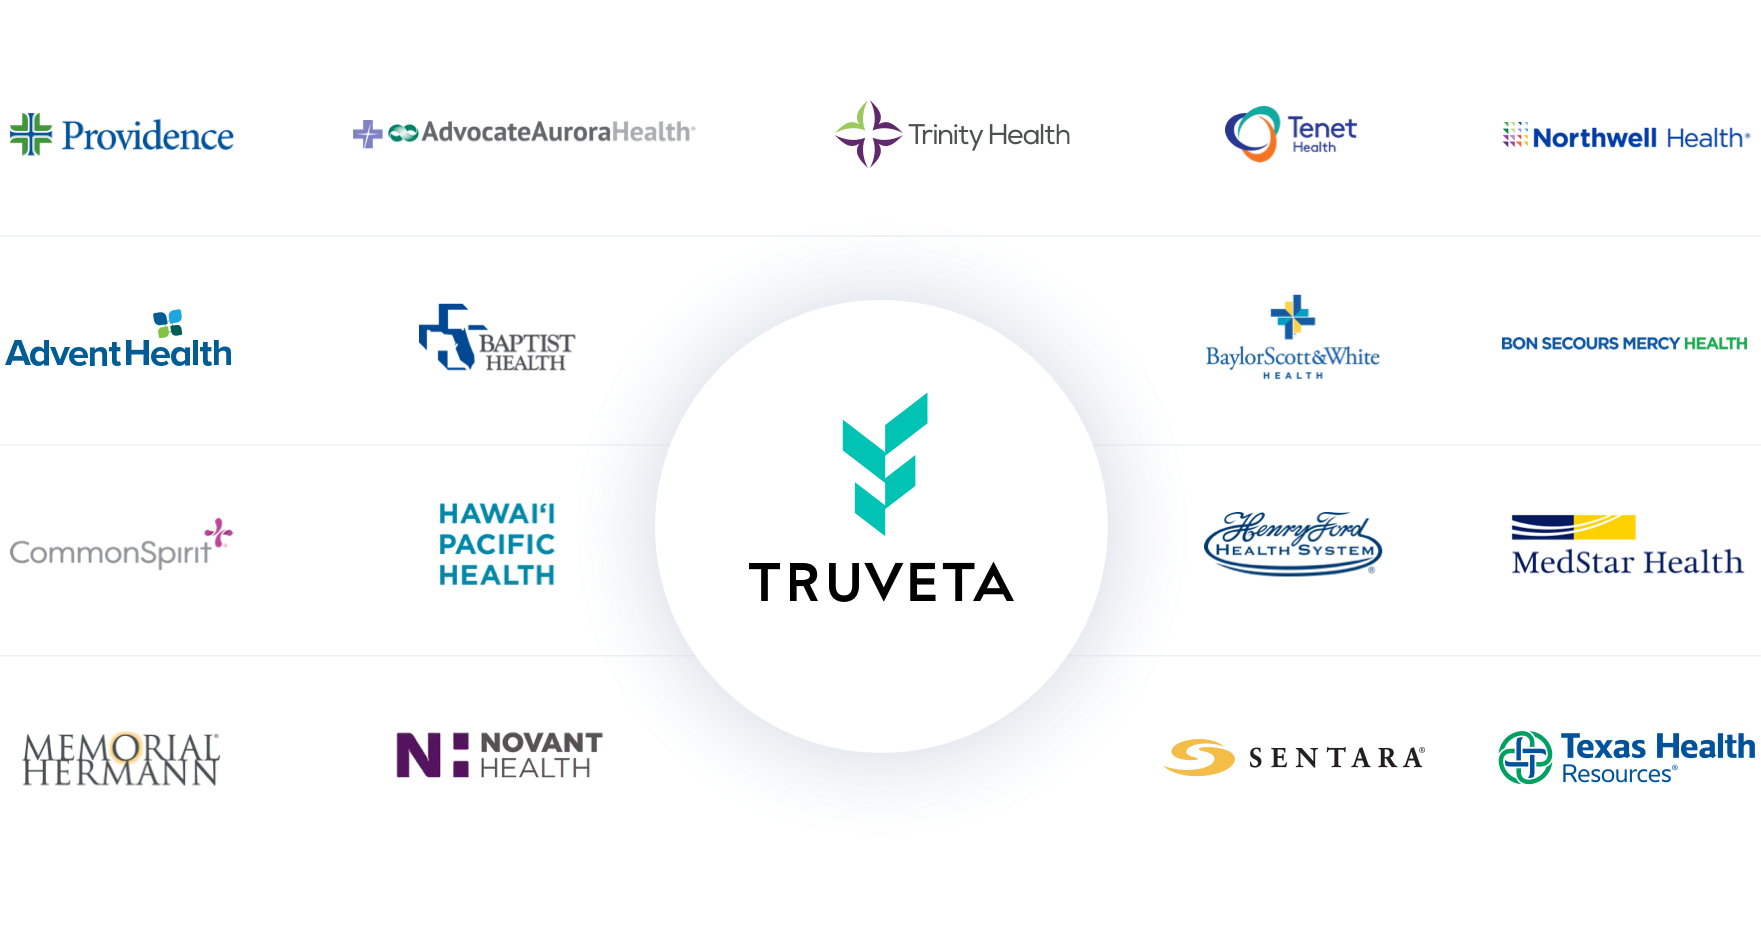 Truveta Grows to More Than 15% of U.S. Patient Care with New Members, Closing Series A Funding with Nearly $100 Million